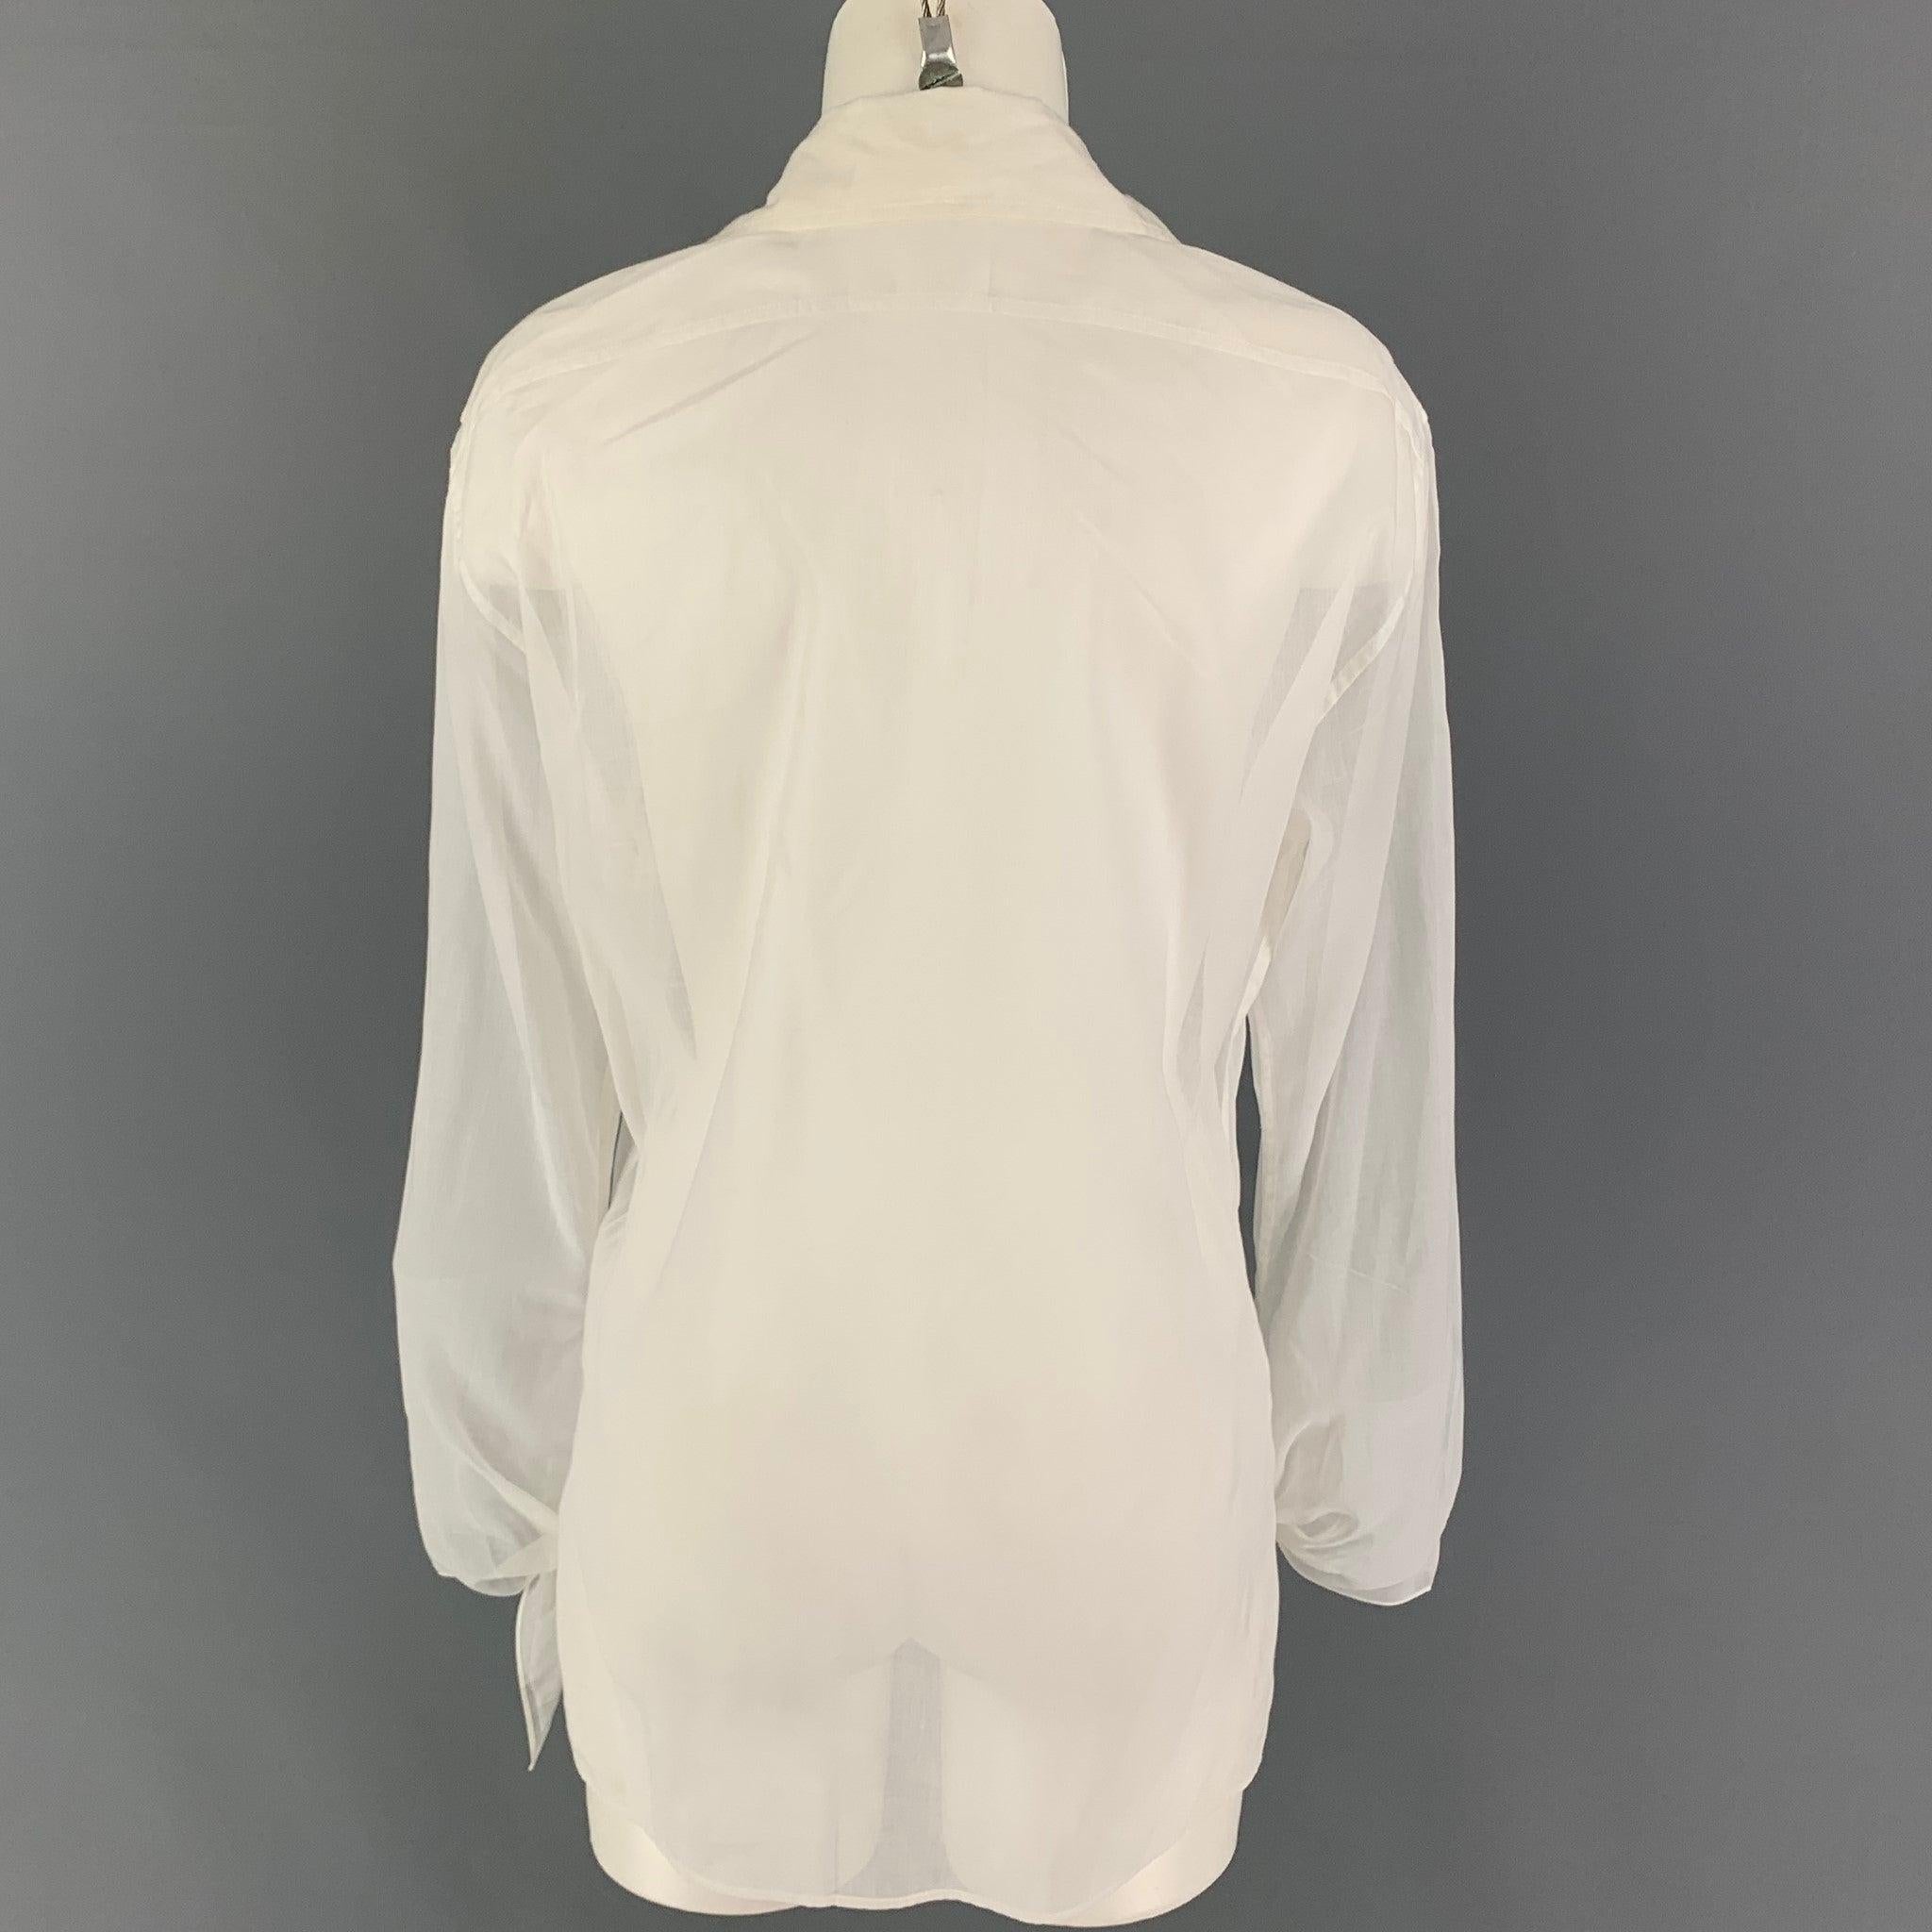 RALPH LAUREN Collection Size 6 White Cotton See Through Blouse In Good Condition For Sale In San Francisco, CA